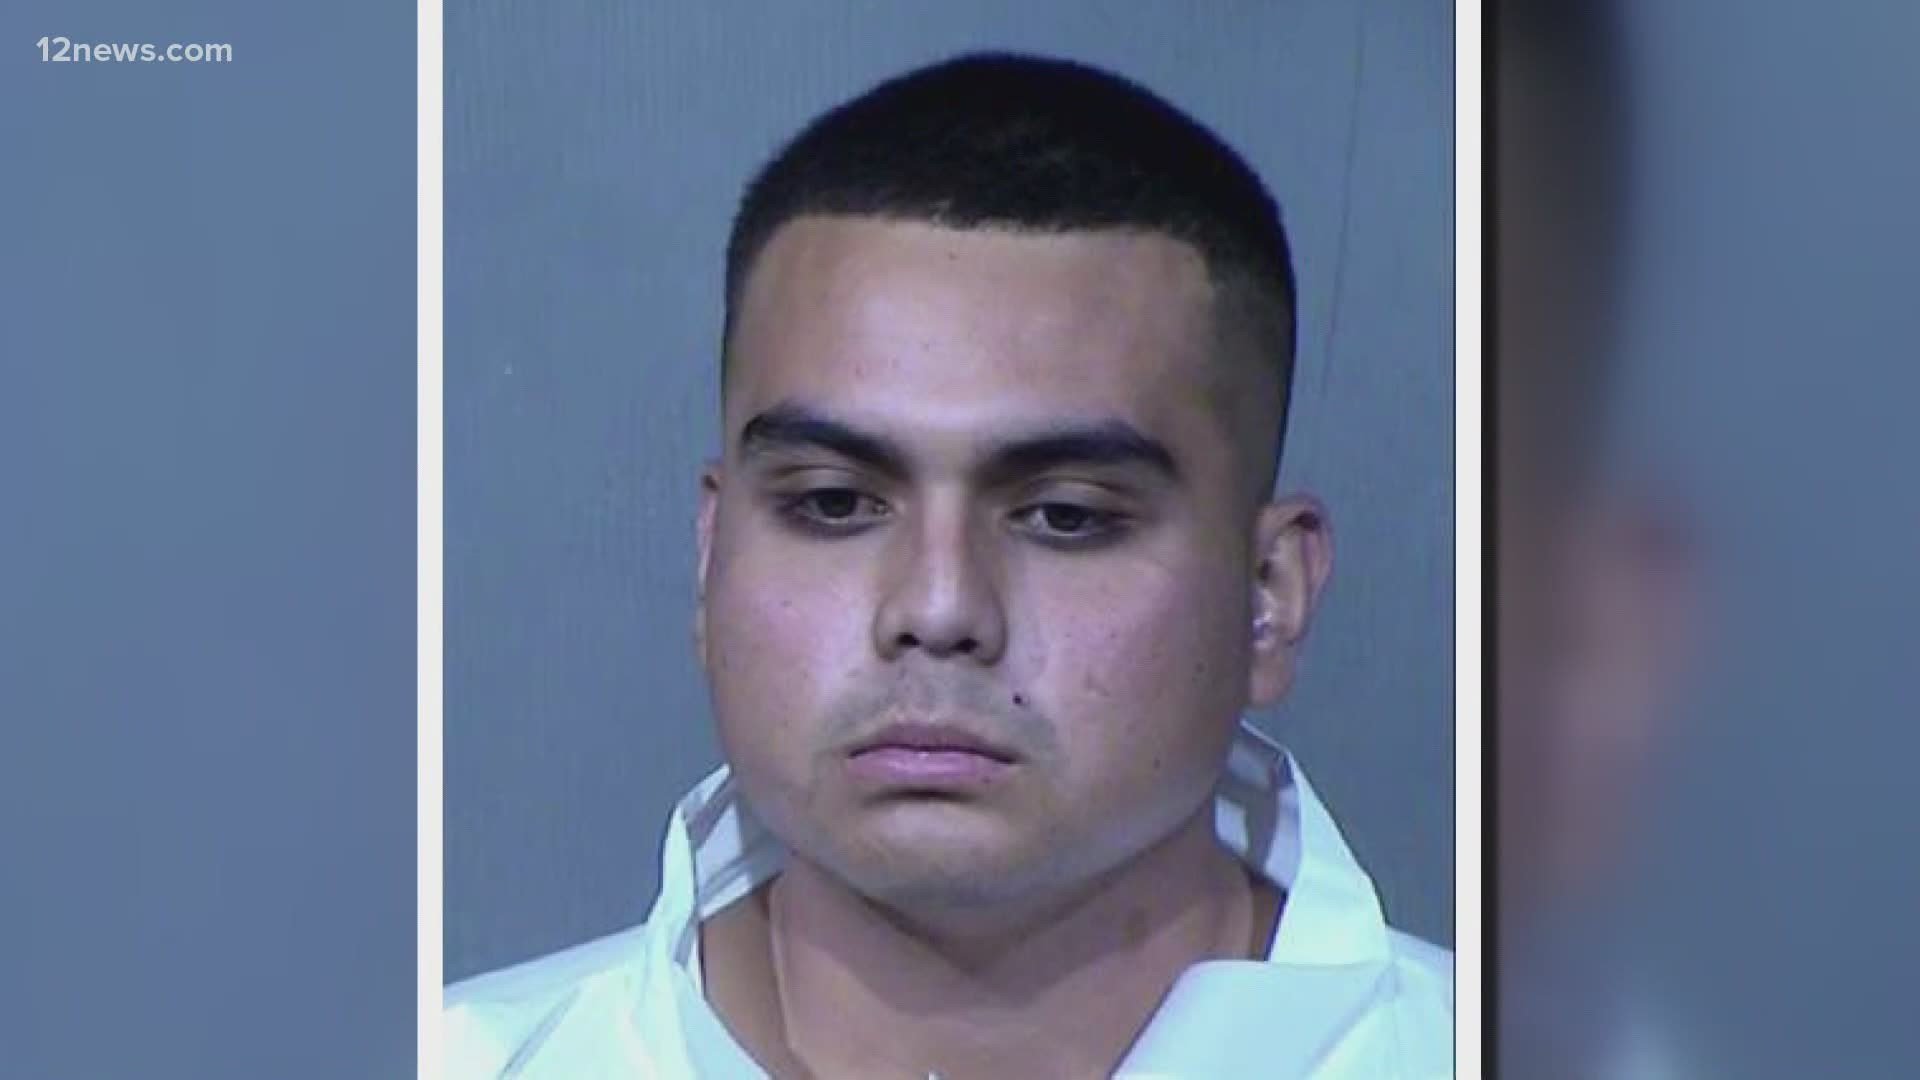 Three people were injured at Westage in Glendale on Wednesday evening, one is in critical condition. The suspected shooter, Armando Hernandez, is in custody.